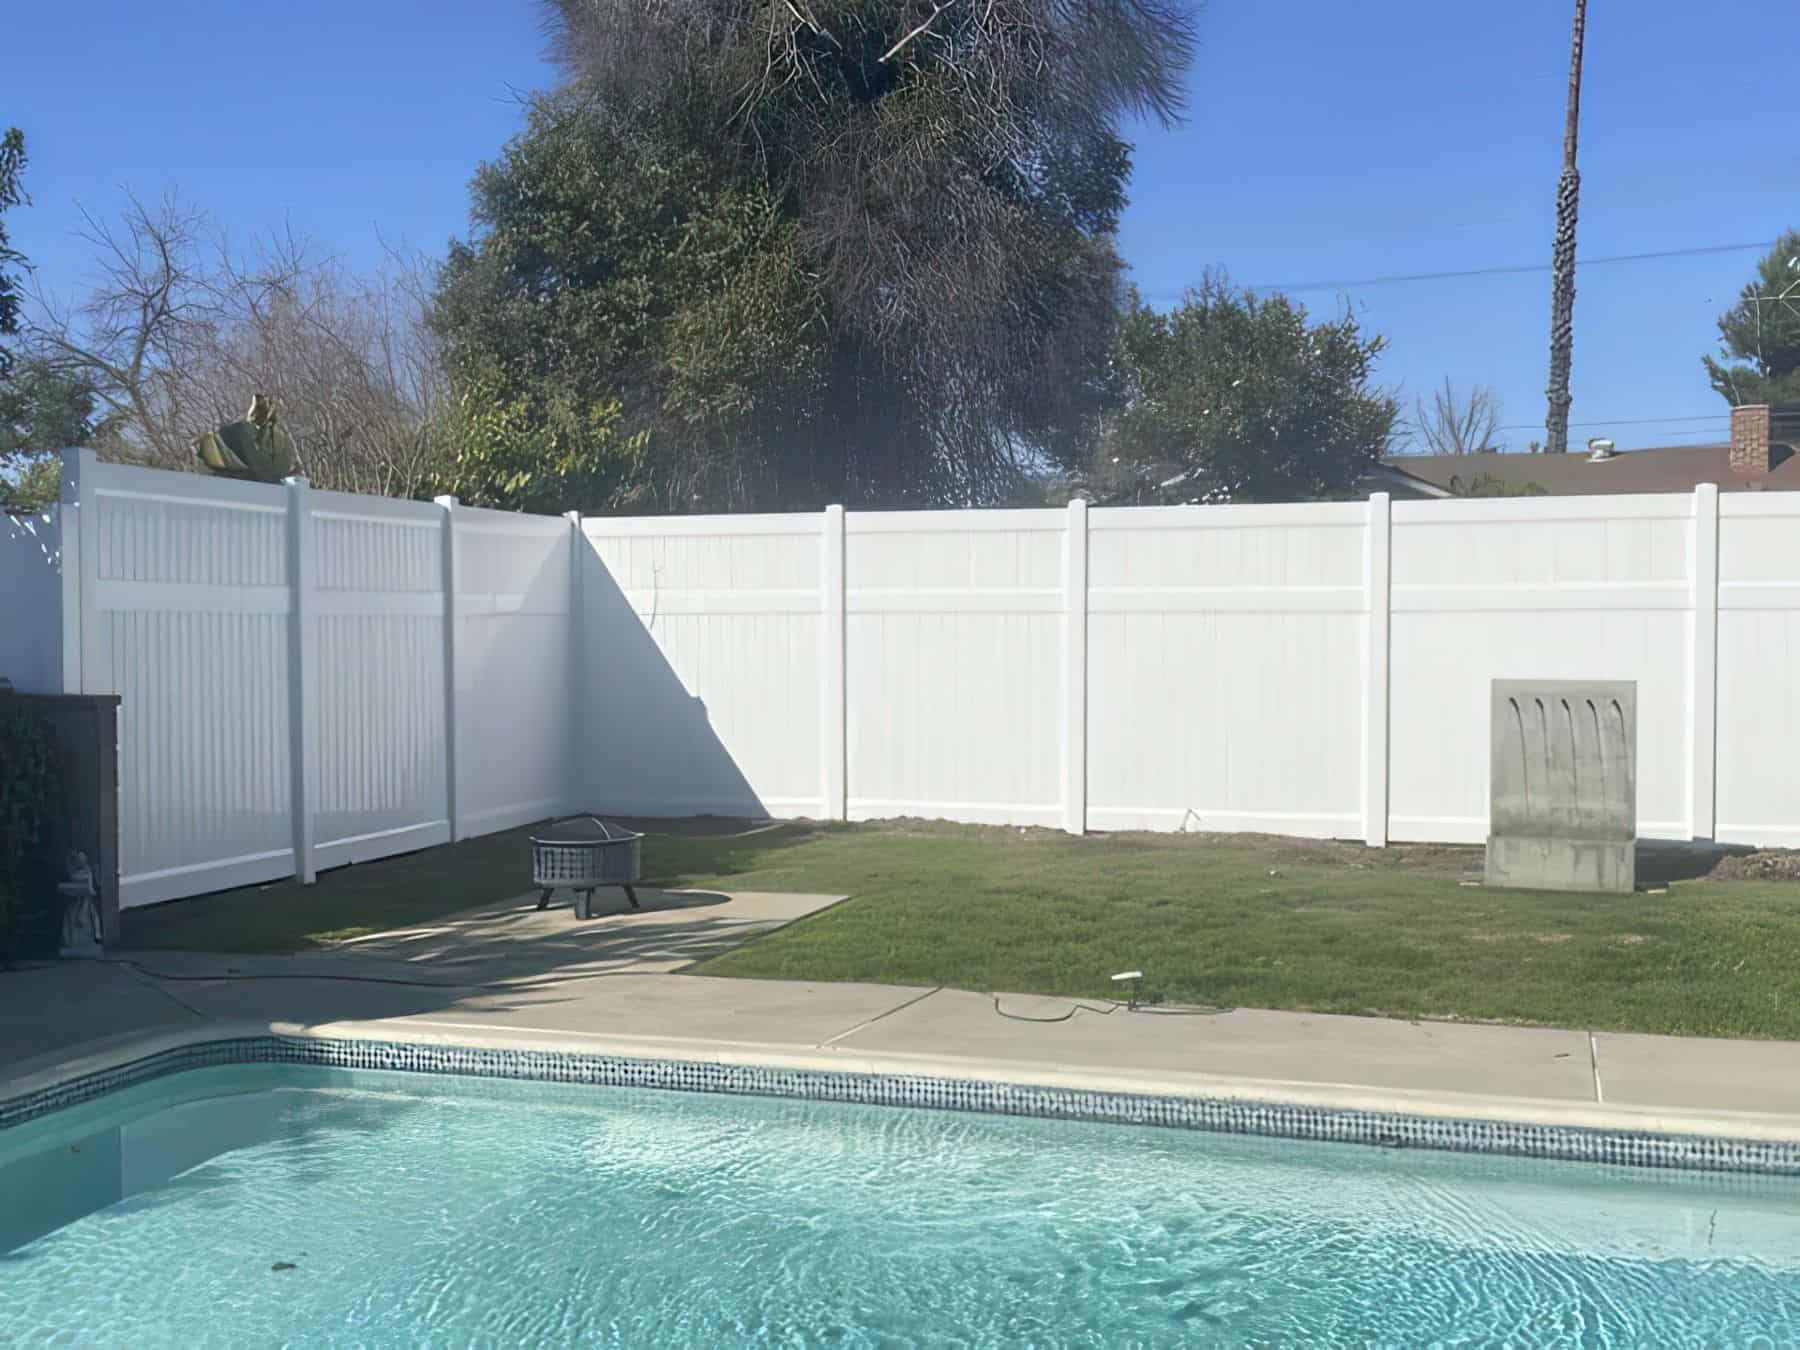 Vinyl pool fence from patio entrance leads into cliff-face tropical themed pool palm trees and other garden patches